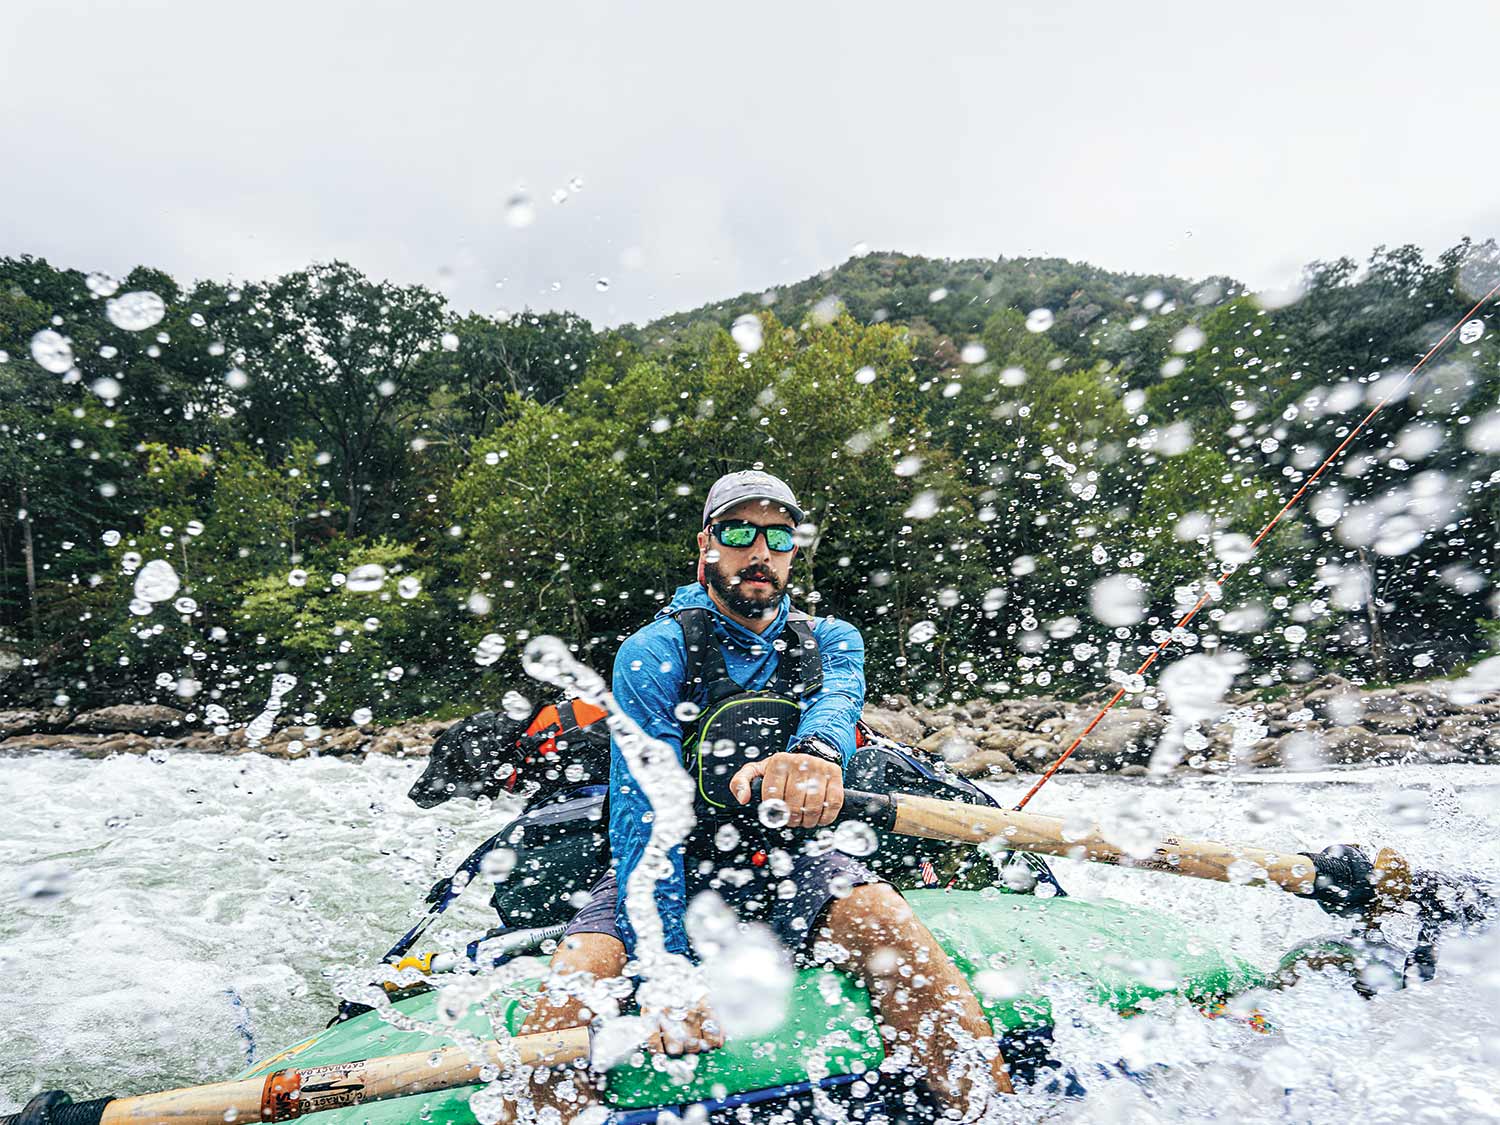 Man whitewater rafting down a river.